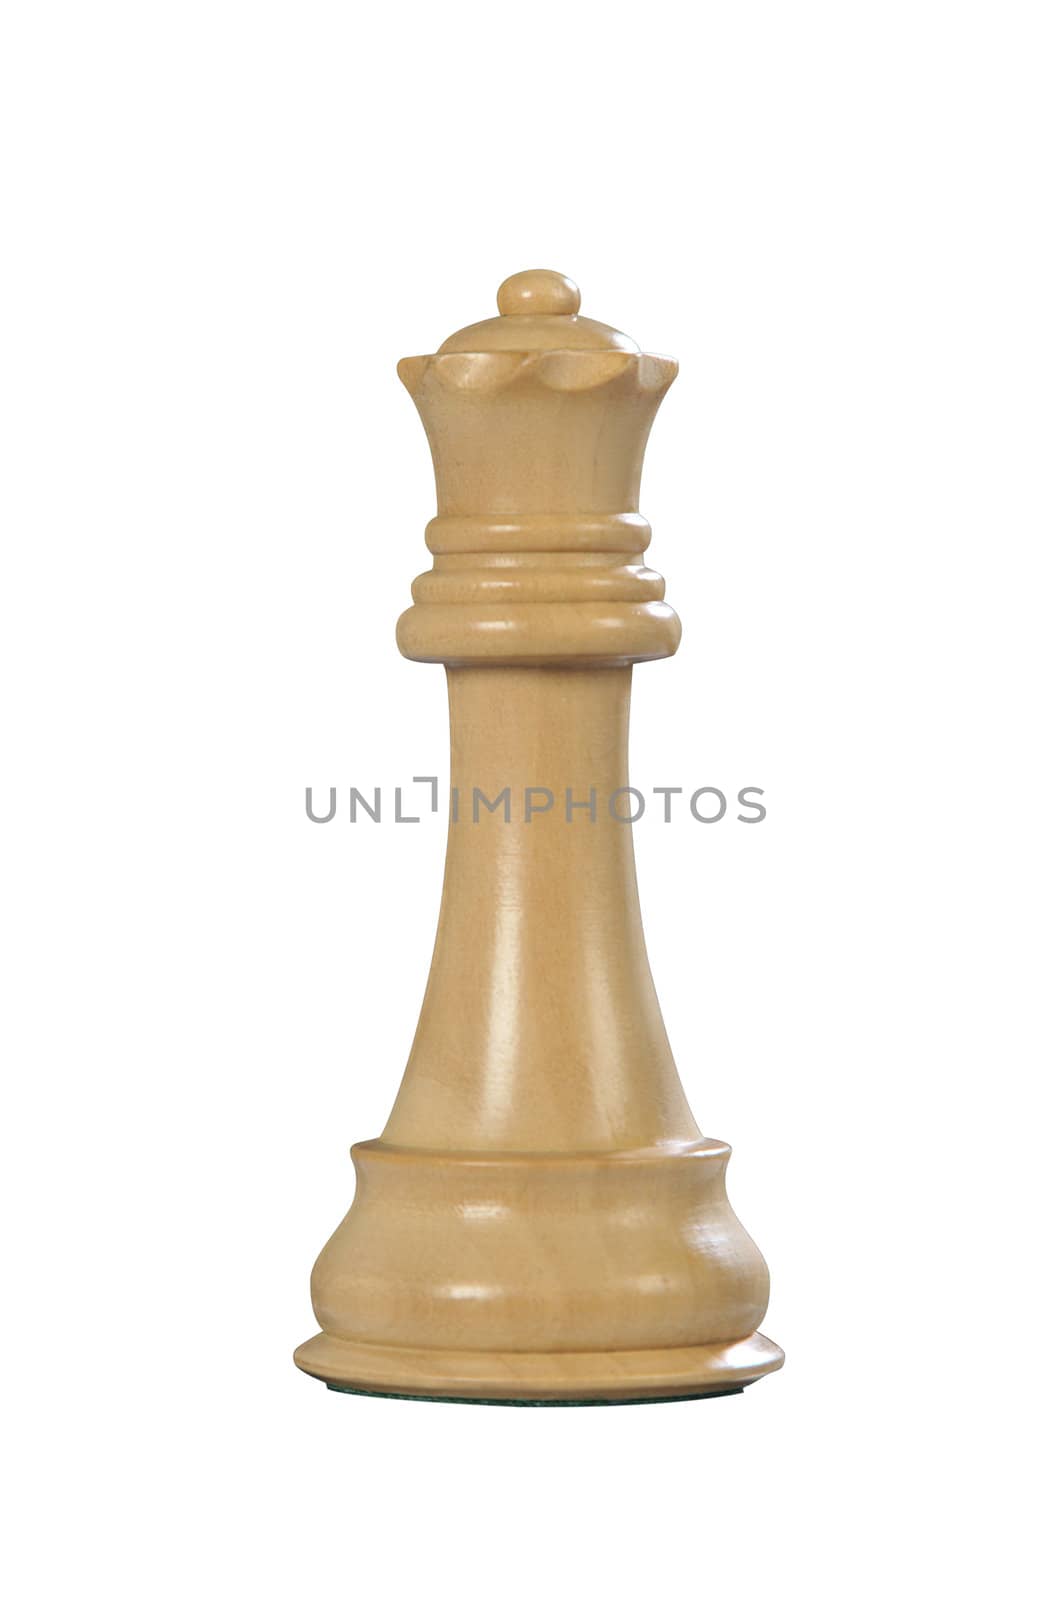 White wooden queen - one of 12 different chess piece